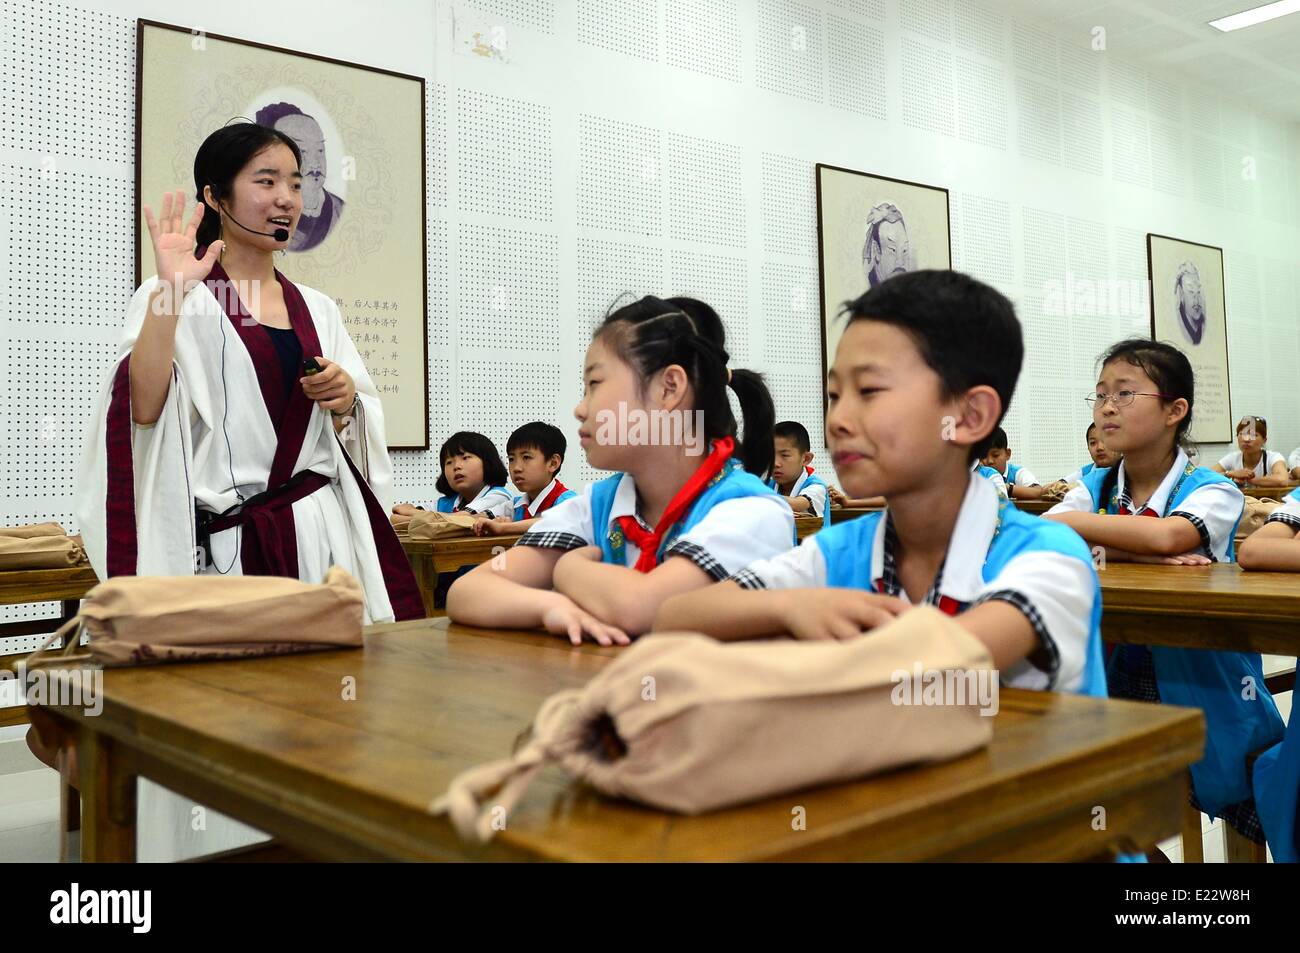 Jinan, China's Shandong Province. 14th June, 2014. A teacher tells stories about the Analects of Confucius during an event to mark the 9th China Cultural Heritage Day at the Shandong Museum in Jinan, capital of east China's Shandong Province, June 14, 2014. © Guo Xulei/Xinhua/Alamy Live News Stock Photo